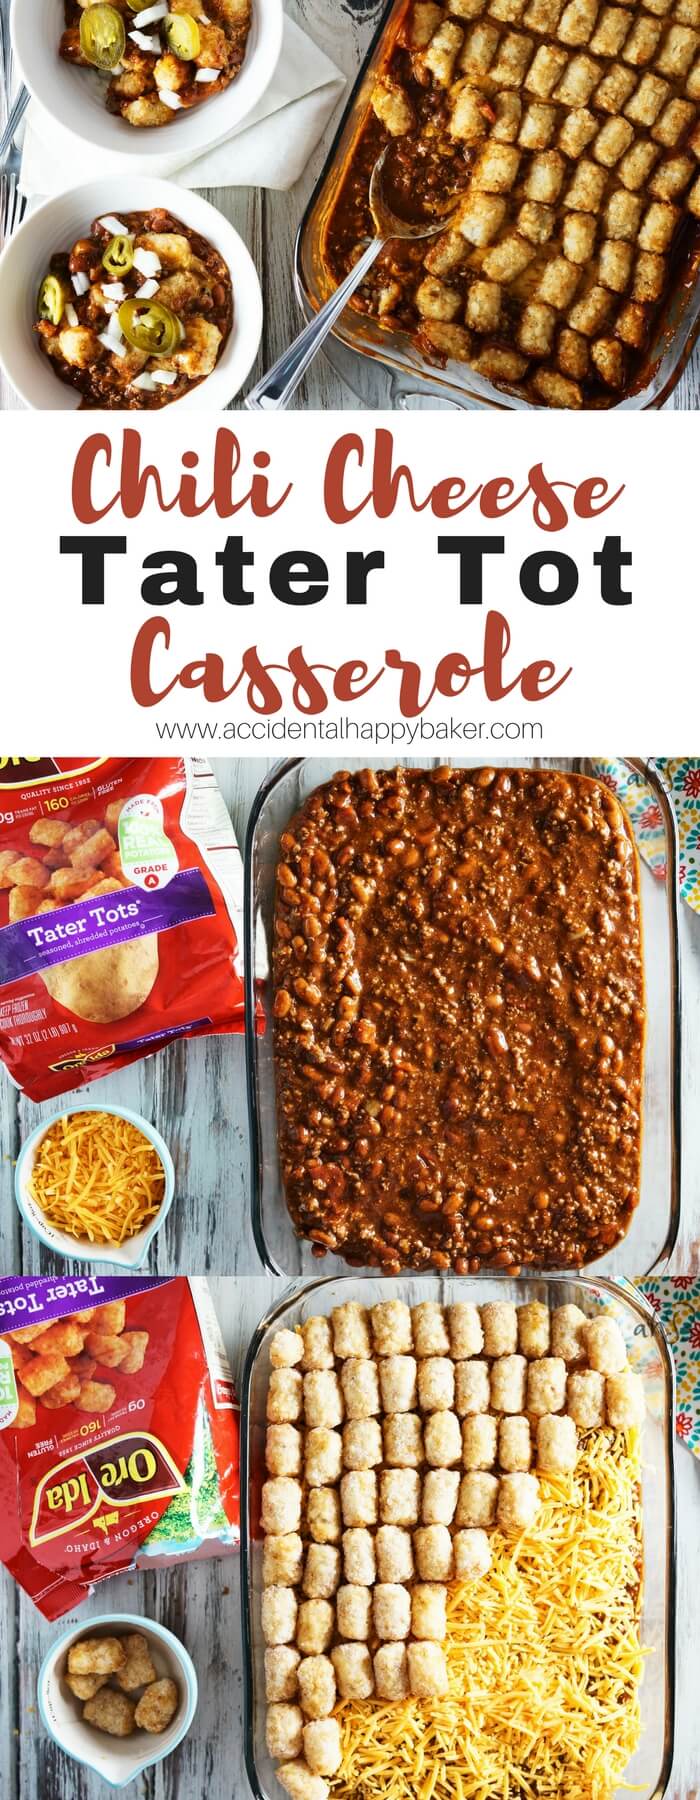 Chili Cheese Tater Tot casserole is an easy make ahead weeknight meal. A hearty beef and bean chili base is topped with gooey melted cheddar cheese and finished with crispy tater tots. 